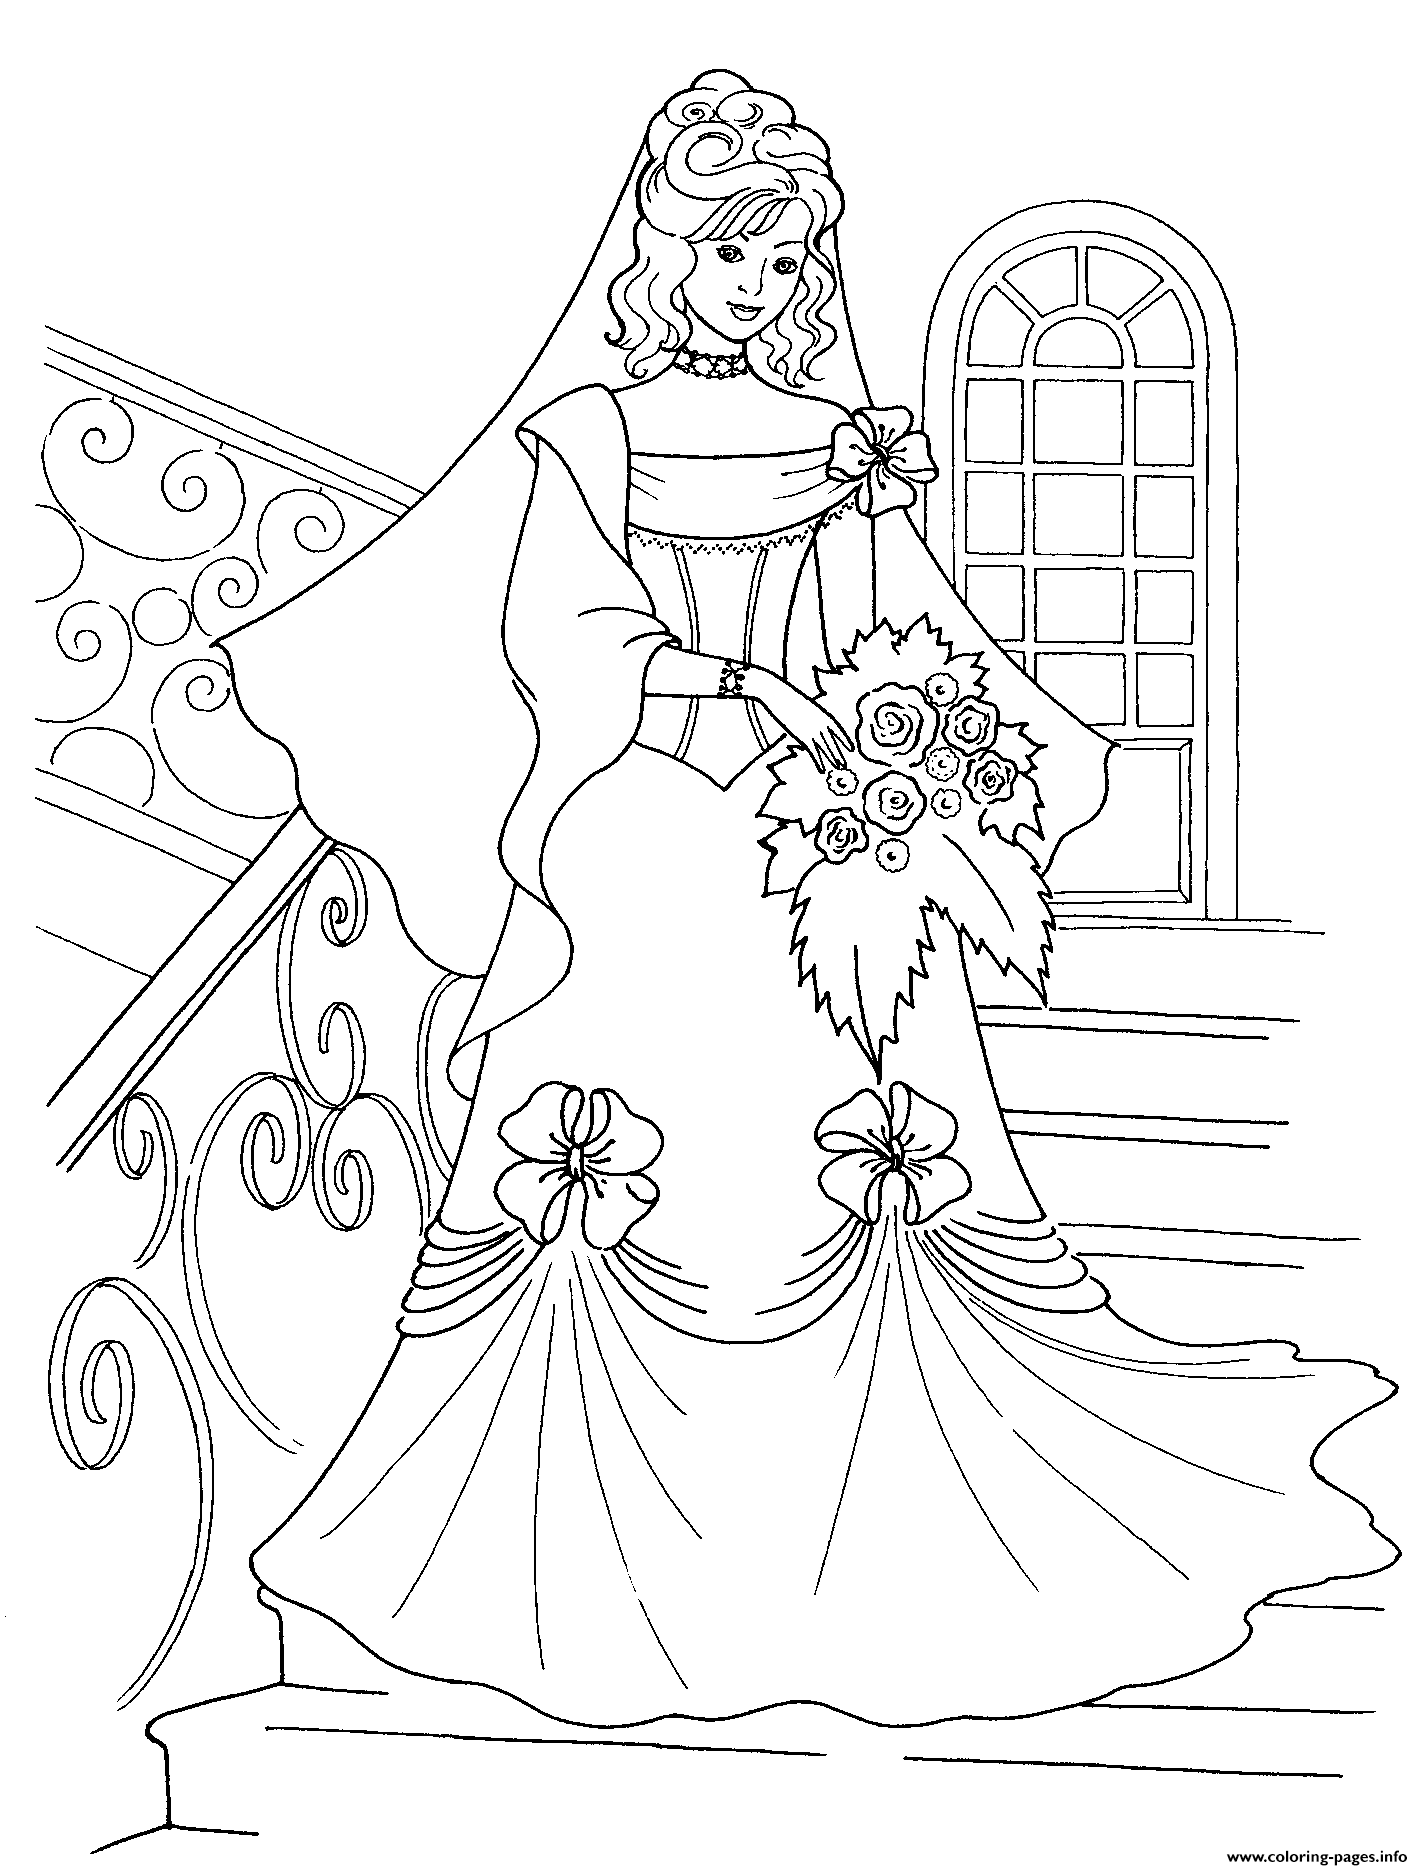 Printable Princess Dress Coloring Pages Dress coloring pages to